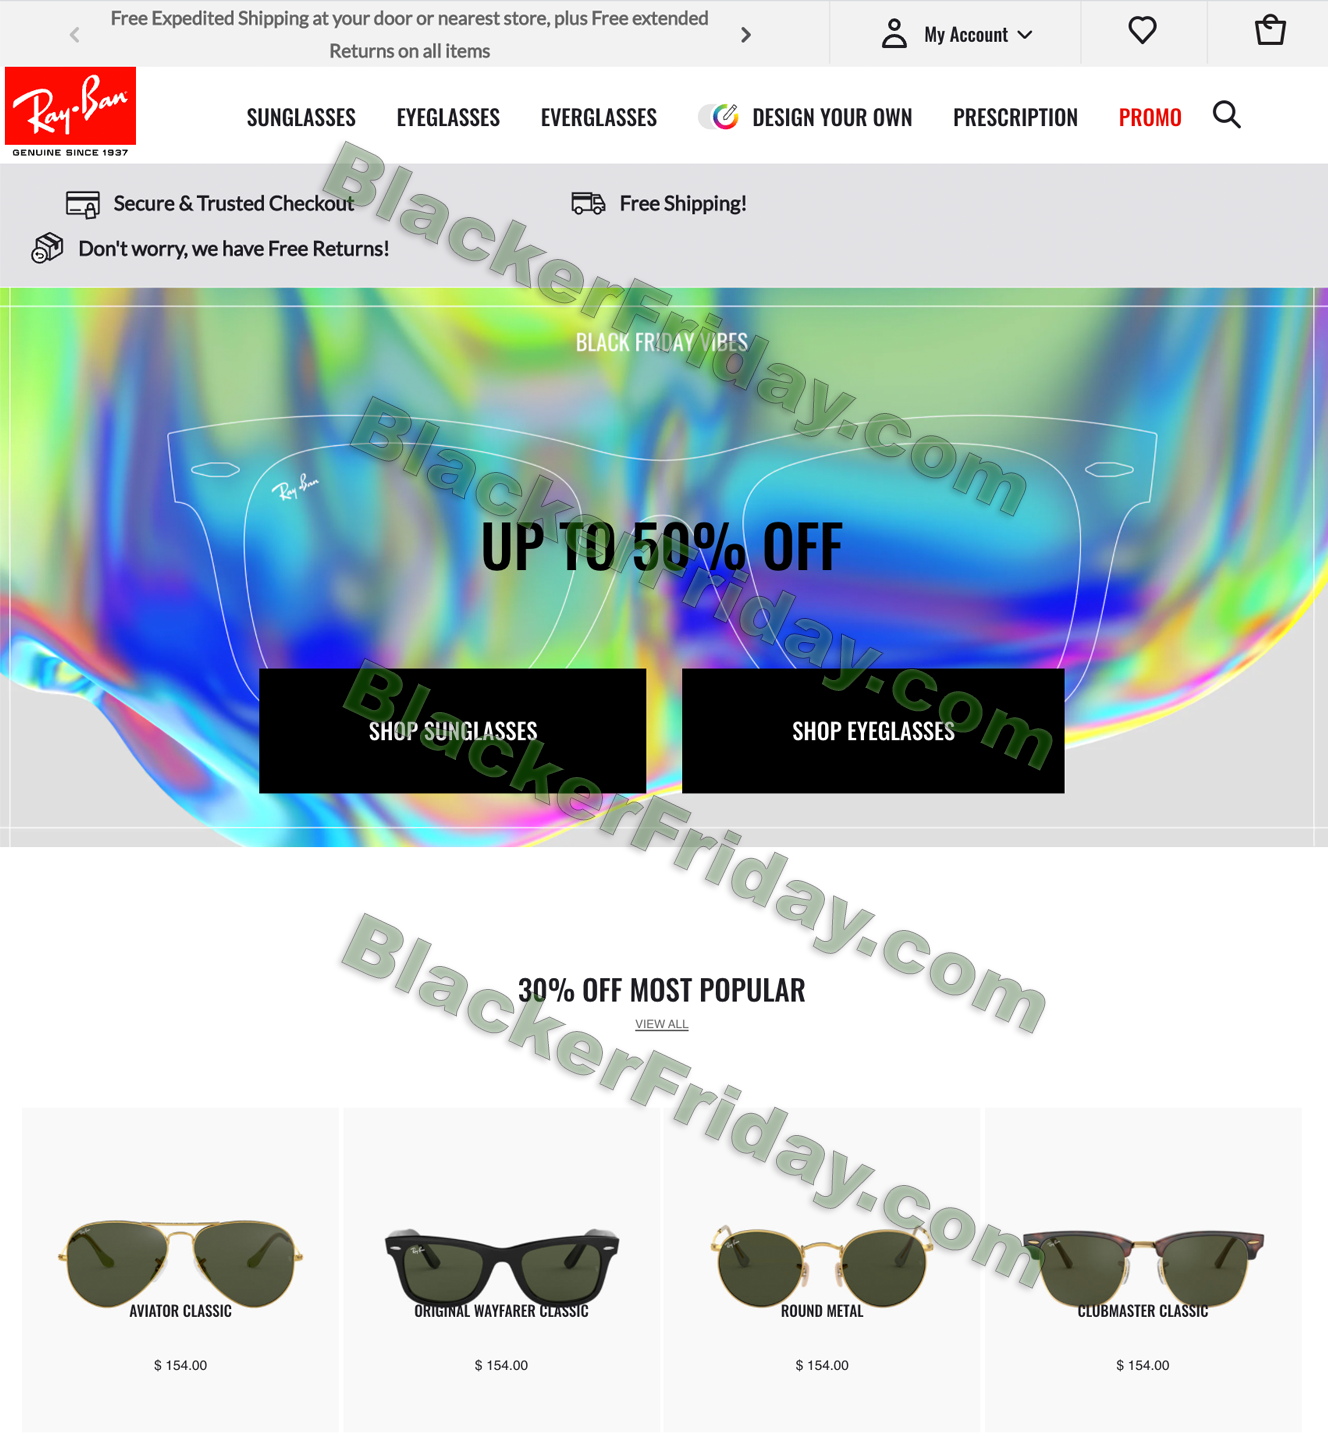 RayBan Black Friday 2021 Sale What to Expect Blacker Friday